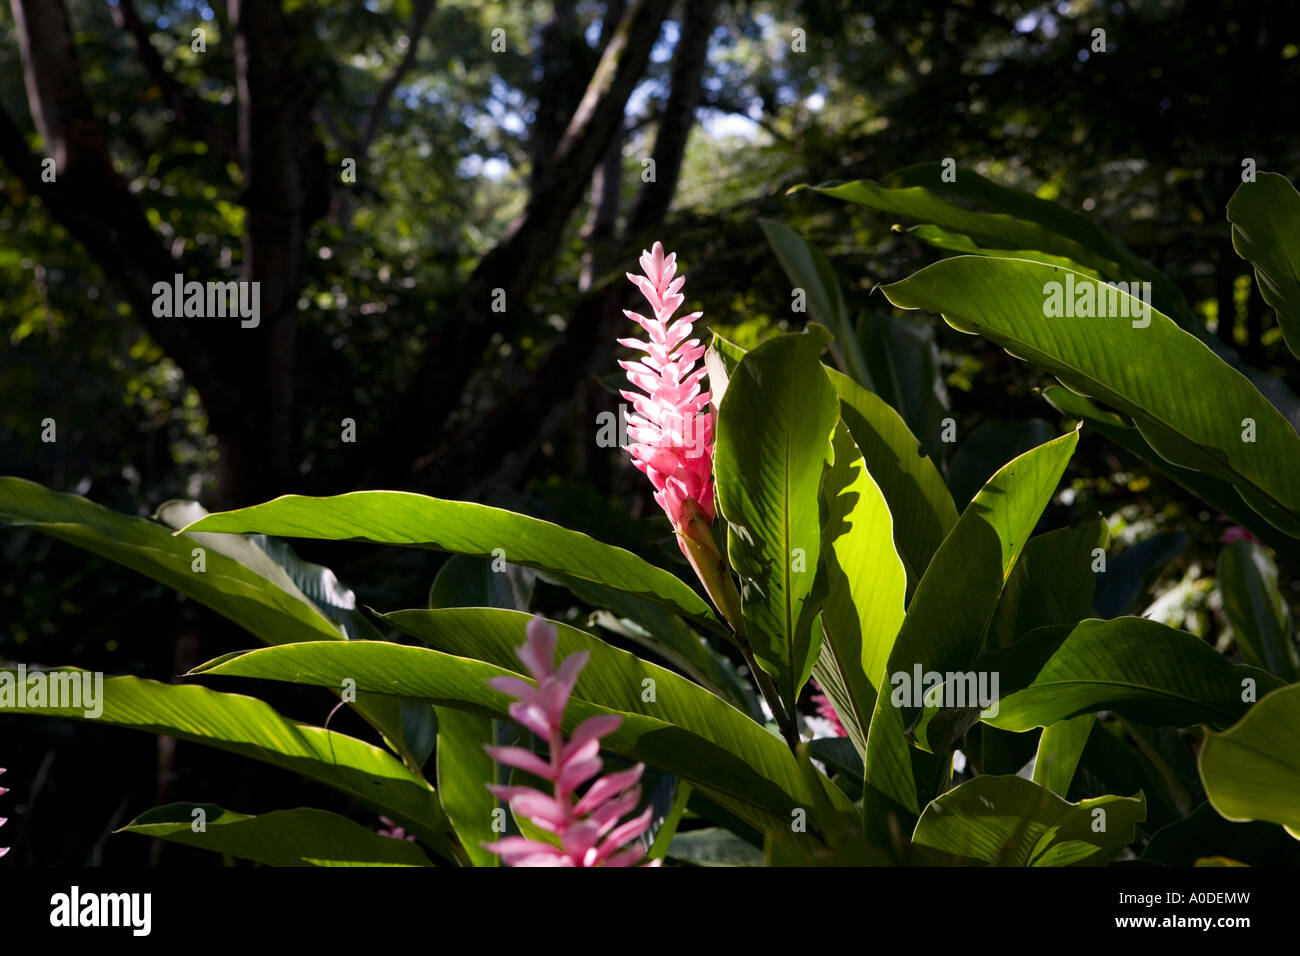 Heliconia flower in rain forest, Island of Tobago, Caribbean Stock Photo